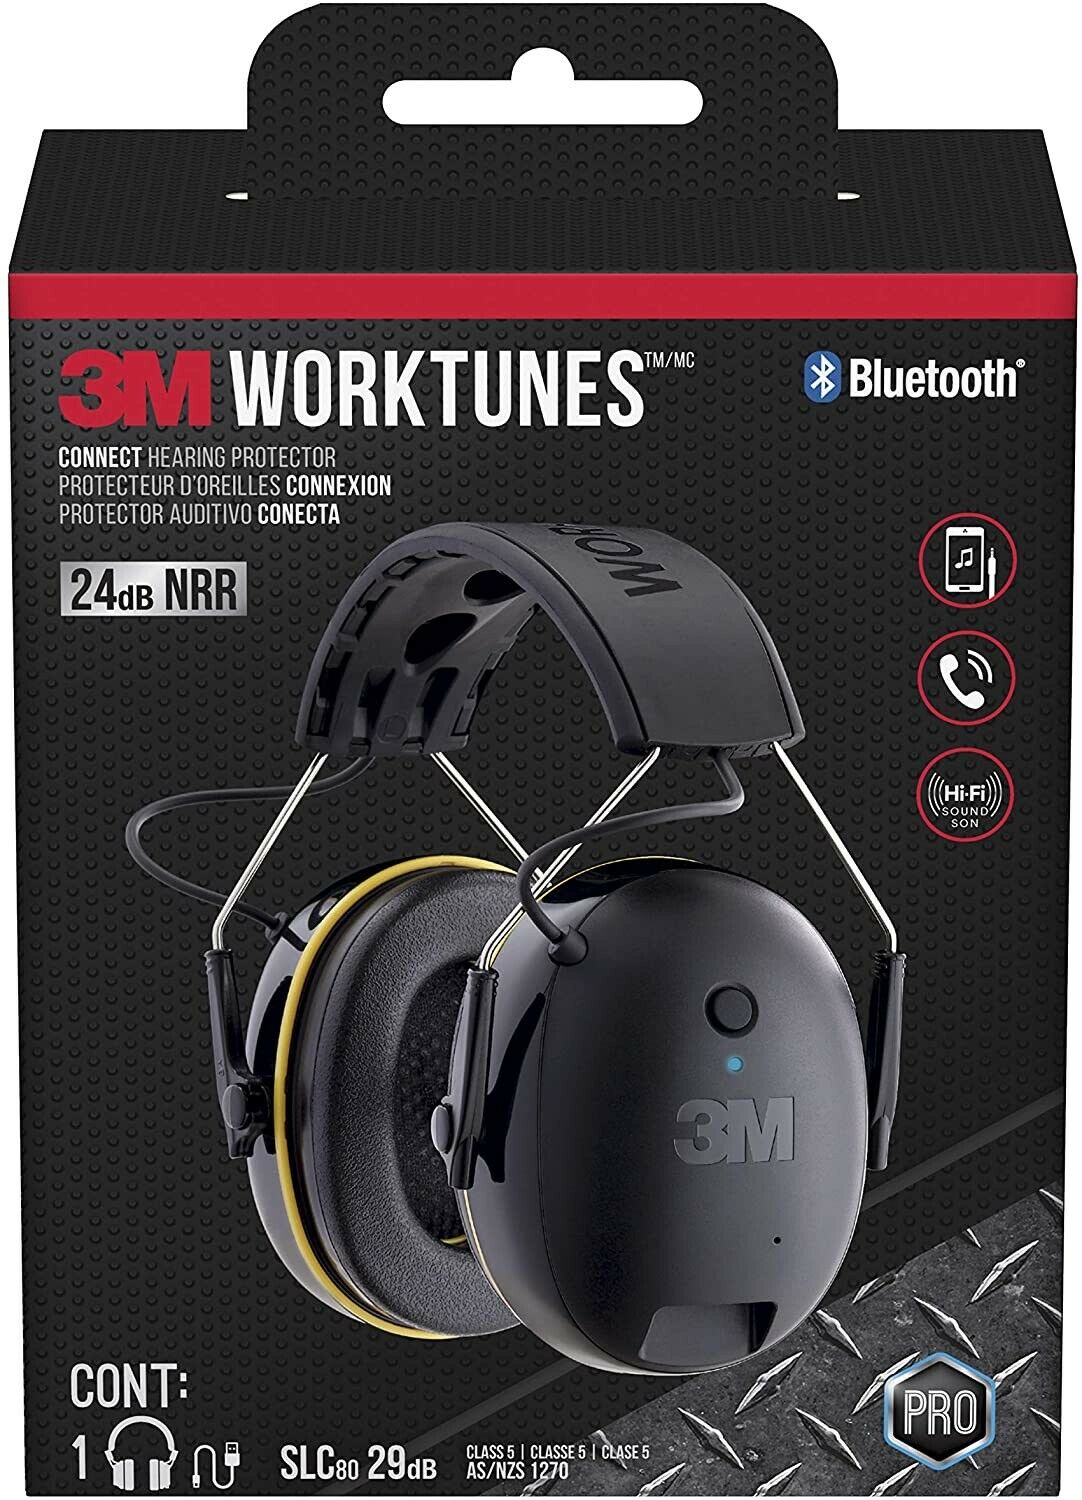 3M Worktunes Call Connect Wireless Hearing Protector Earmuff Bluetooth –  Gadget Tech Store